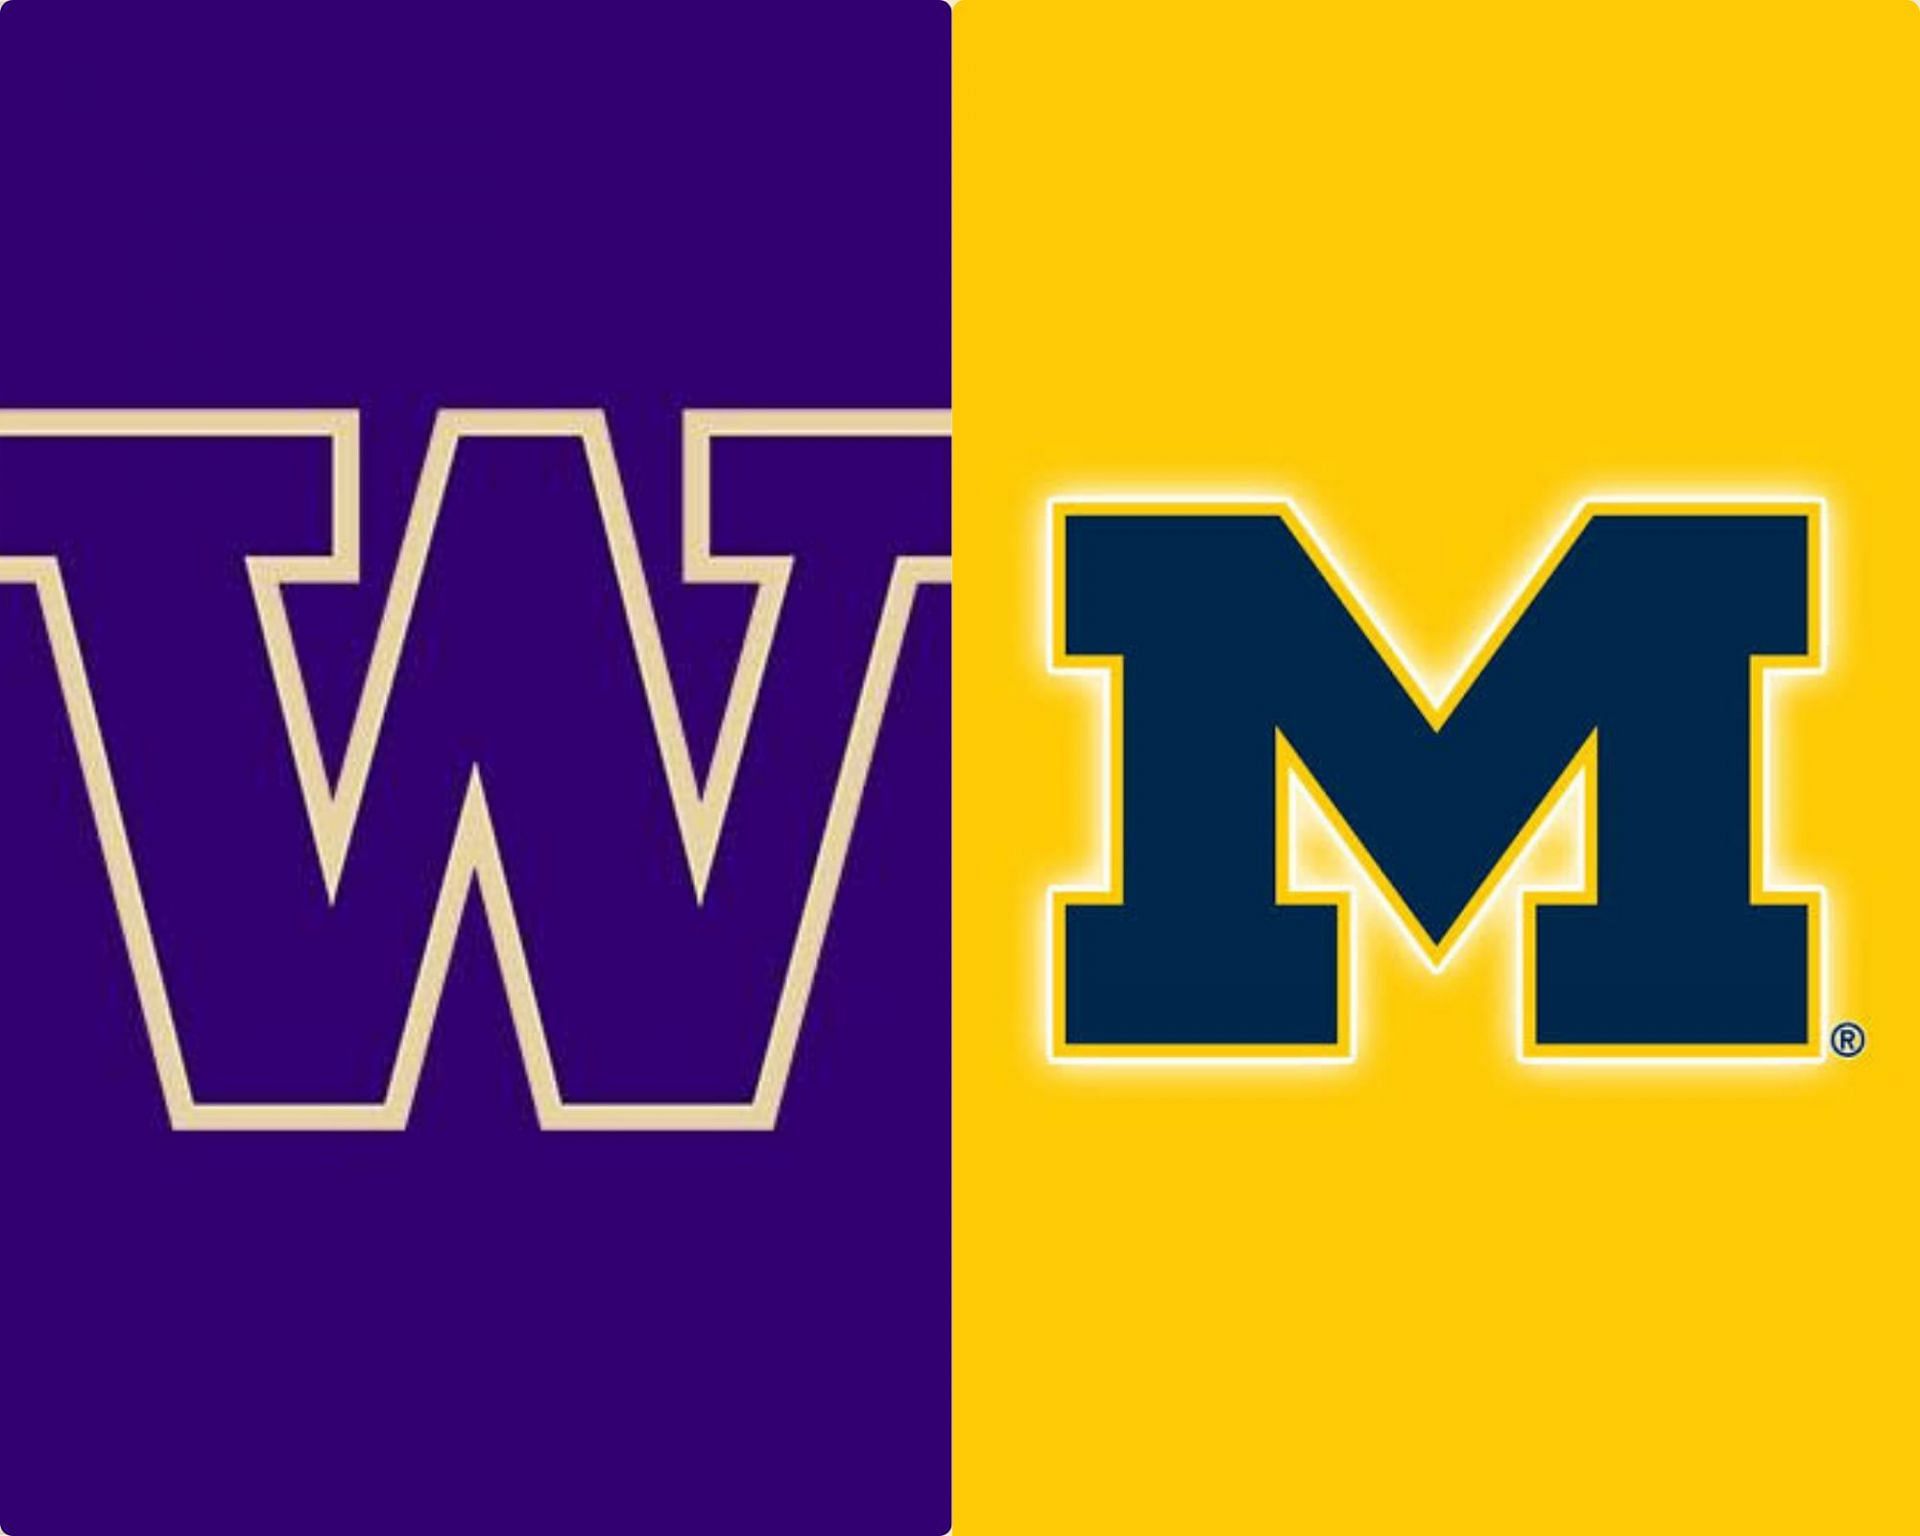 The Washington Huskies are set to face Michigan in the national championship game 